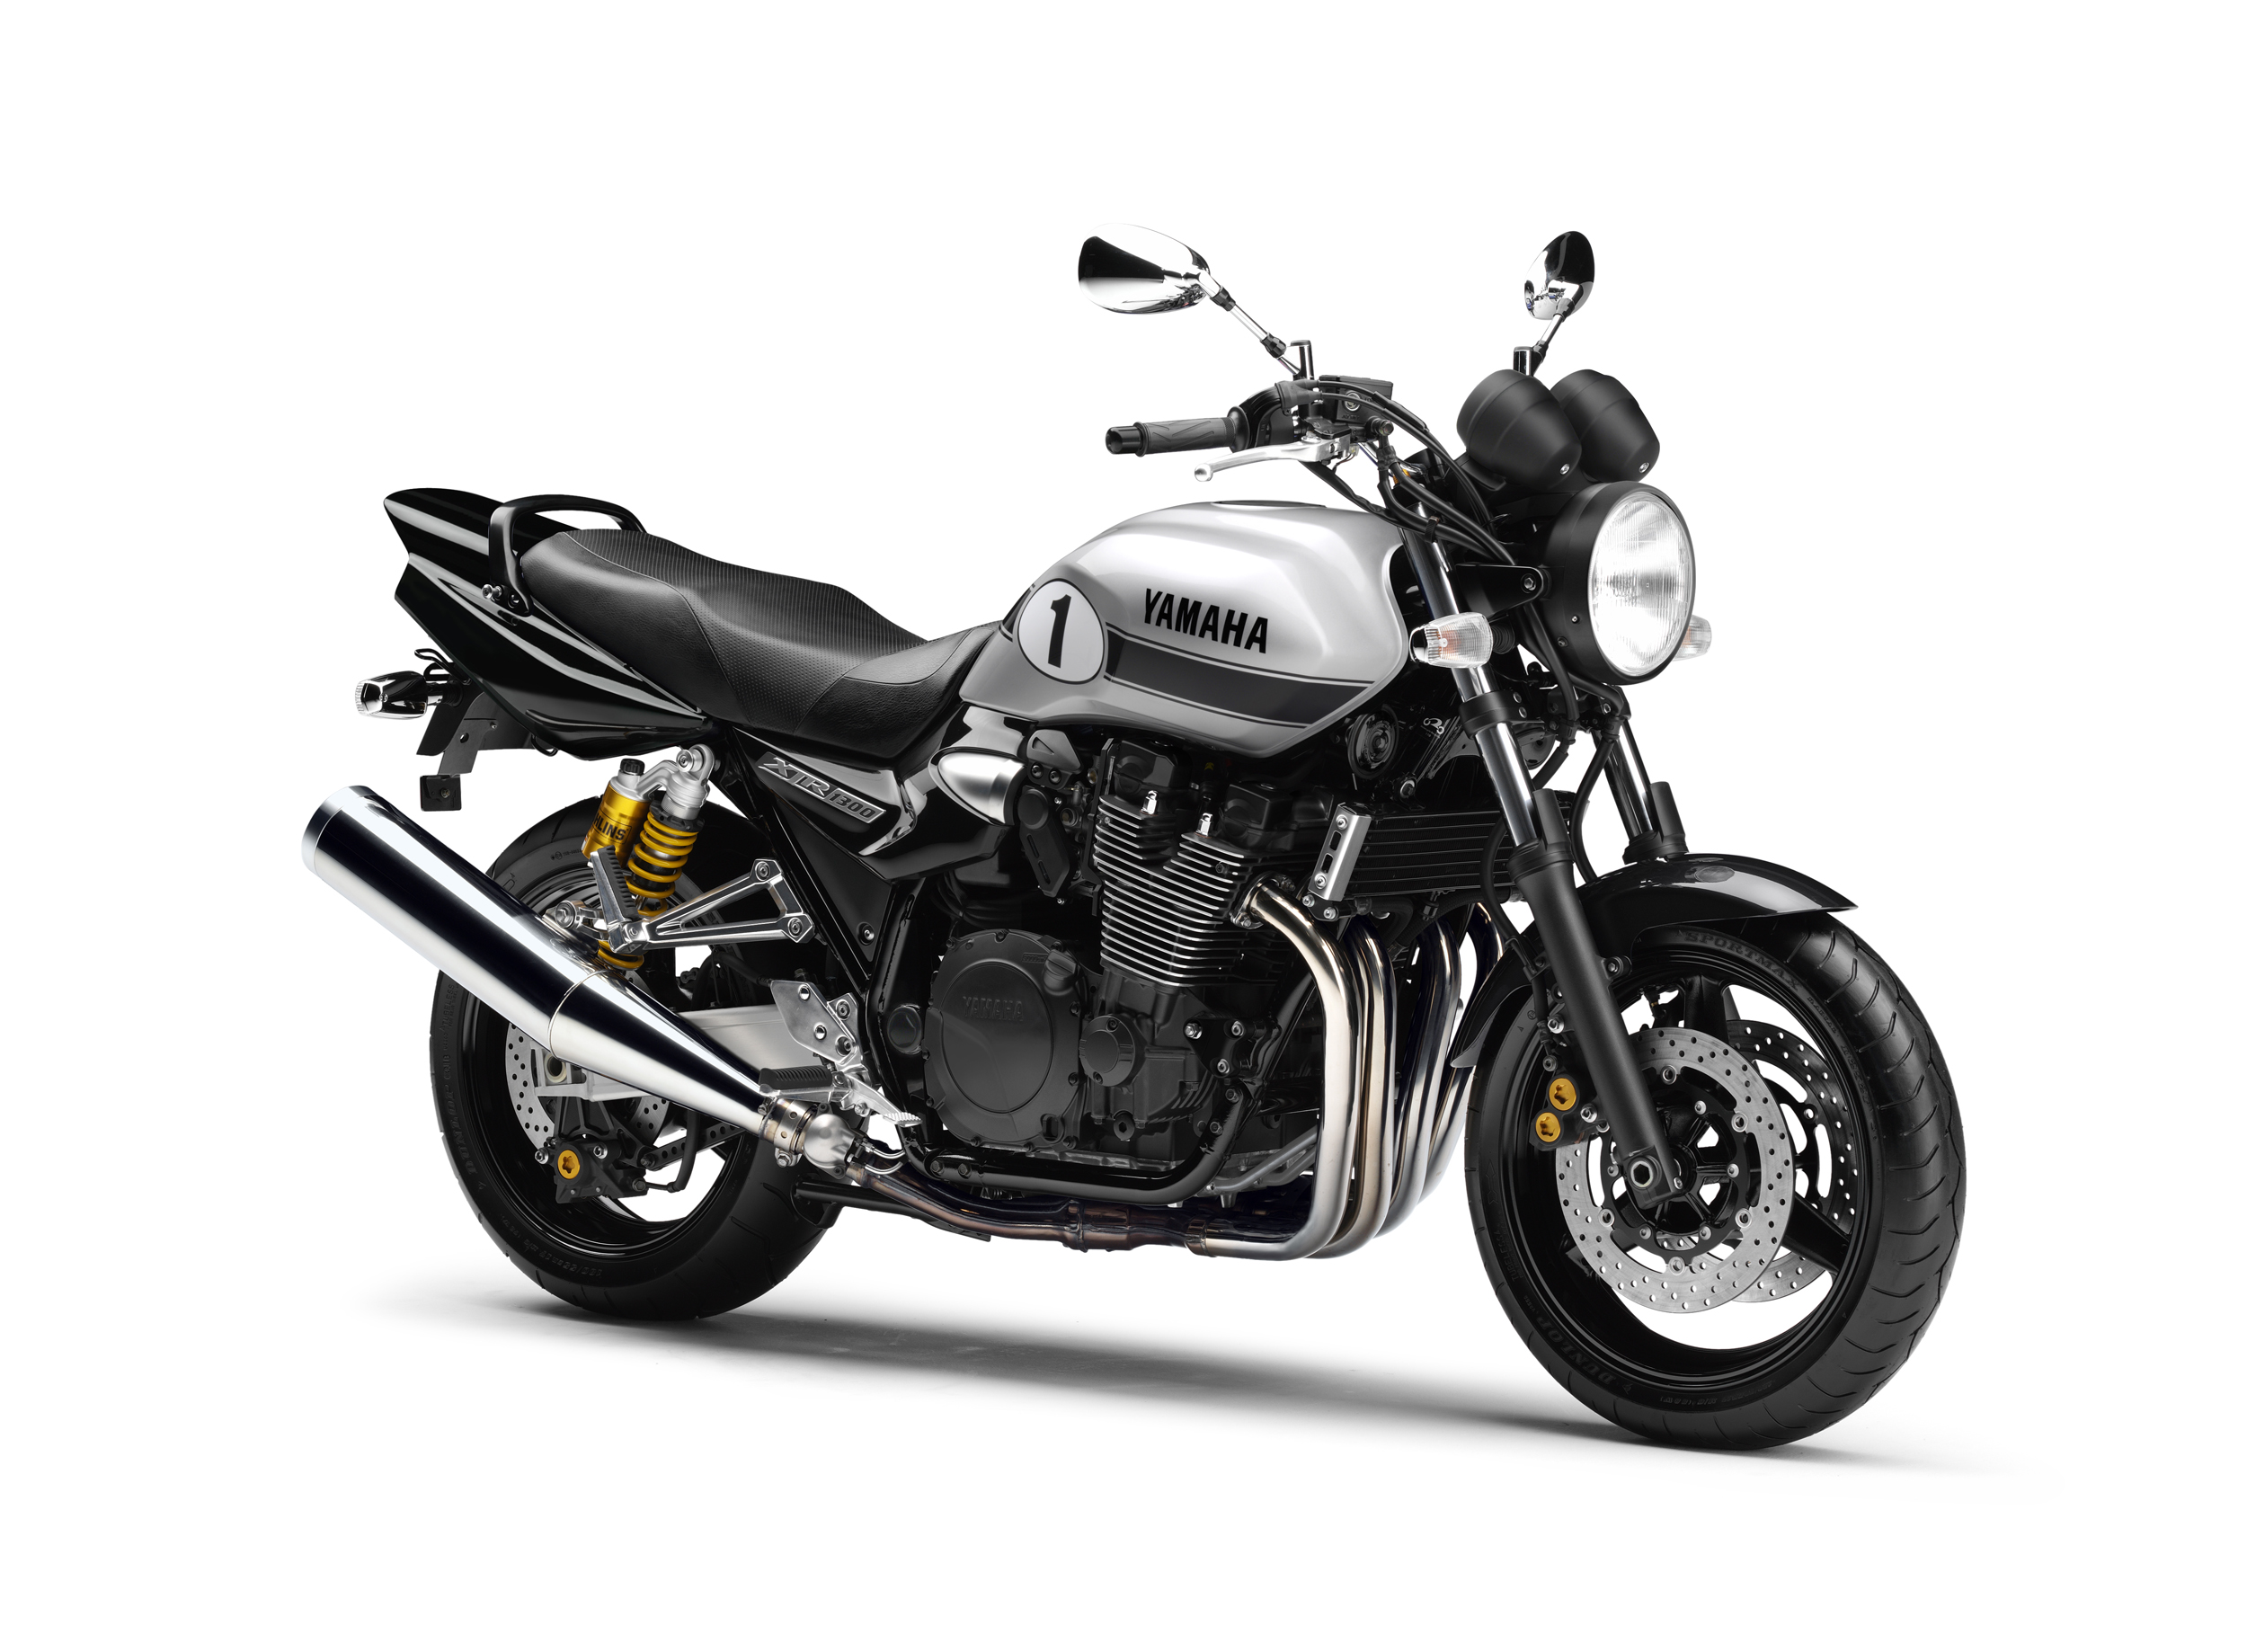 The traditional Yamaha XJR1300 lives on